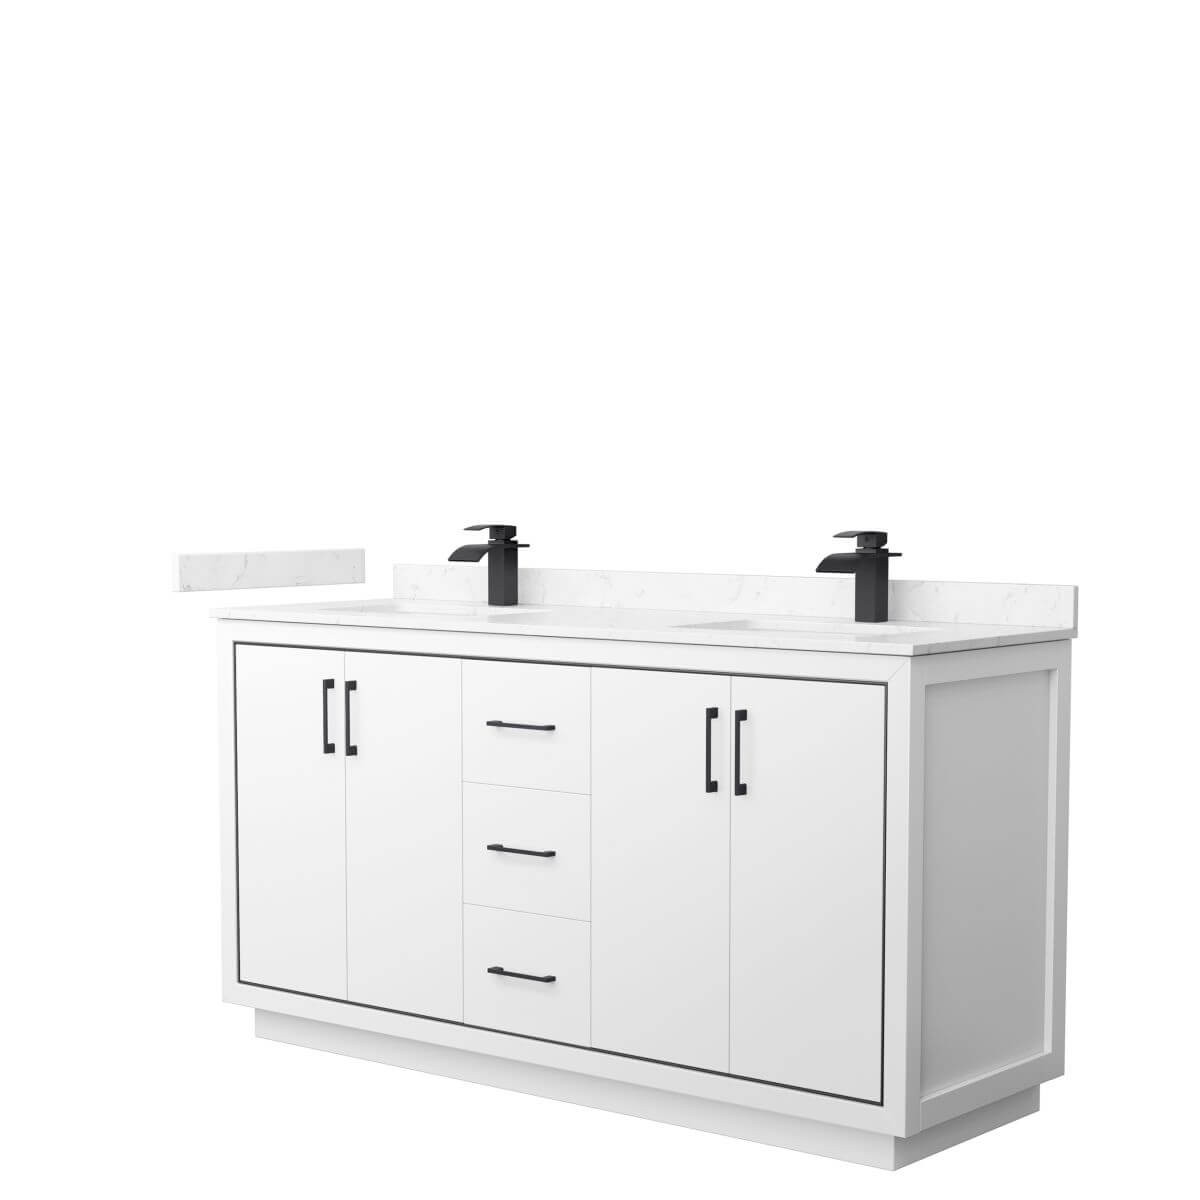 Wyndham Collection WCF111166DWBC2UNSMXX Icon 66 inch Double Bathroom Vanity in White with Carrara Cultured Marble Countertop, Undermount Square Sinks and Matte Black Trim